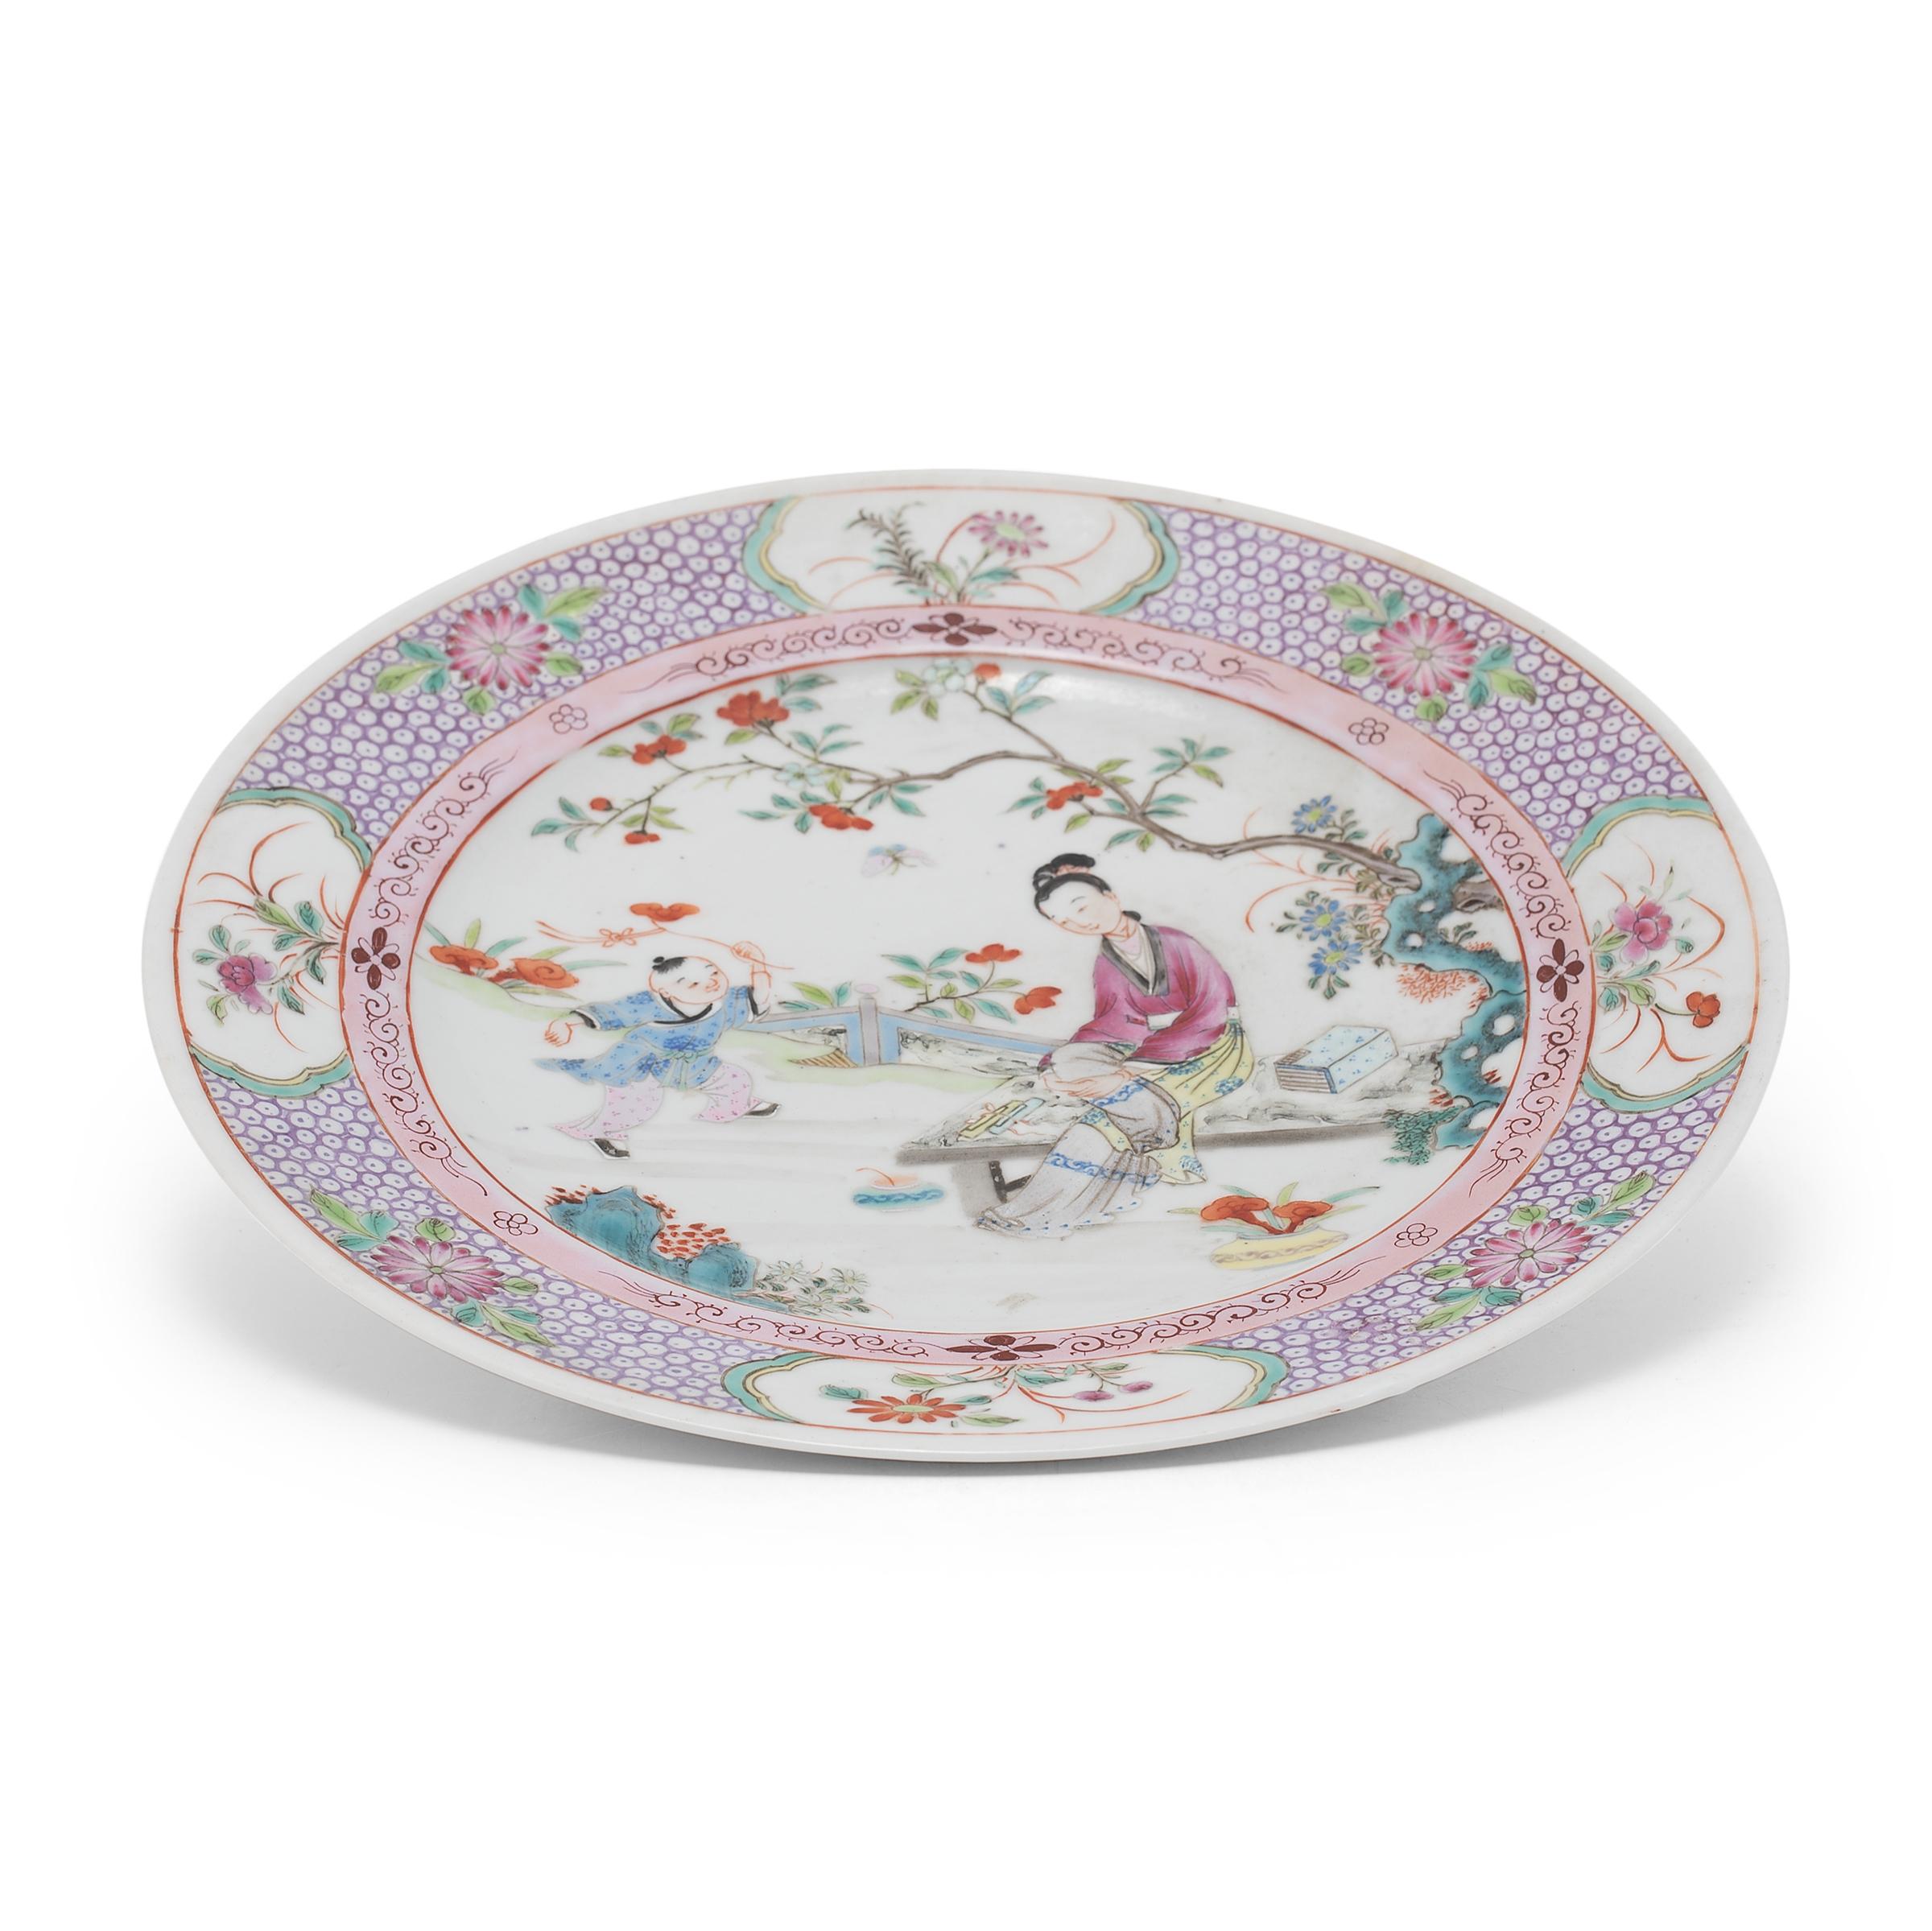 20th Century Pair of Chinese Famille Rose Plates with Garden Scenes, C. 1900 For Sale